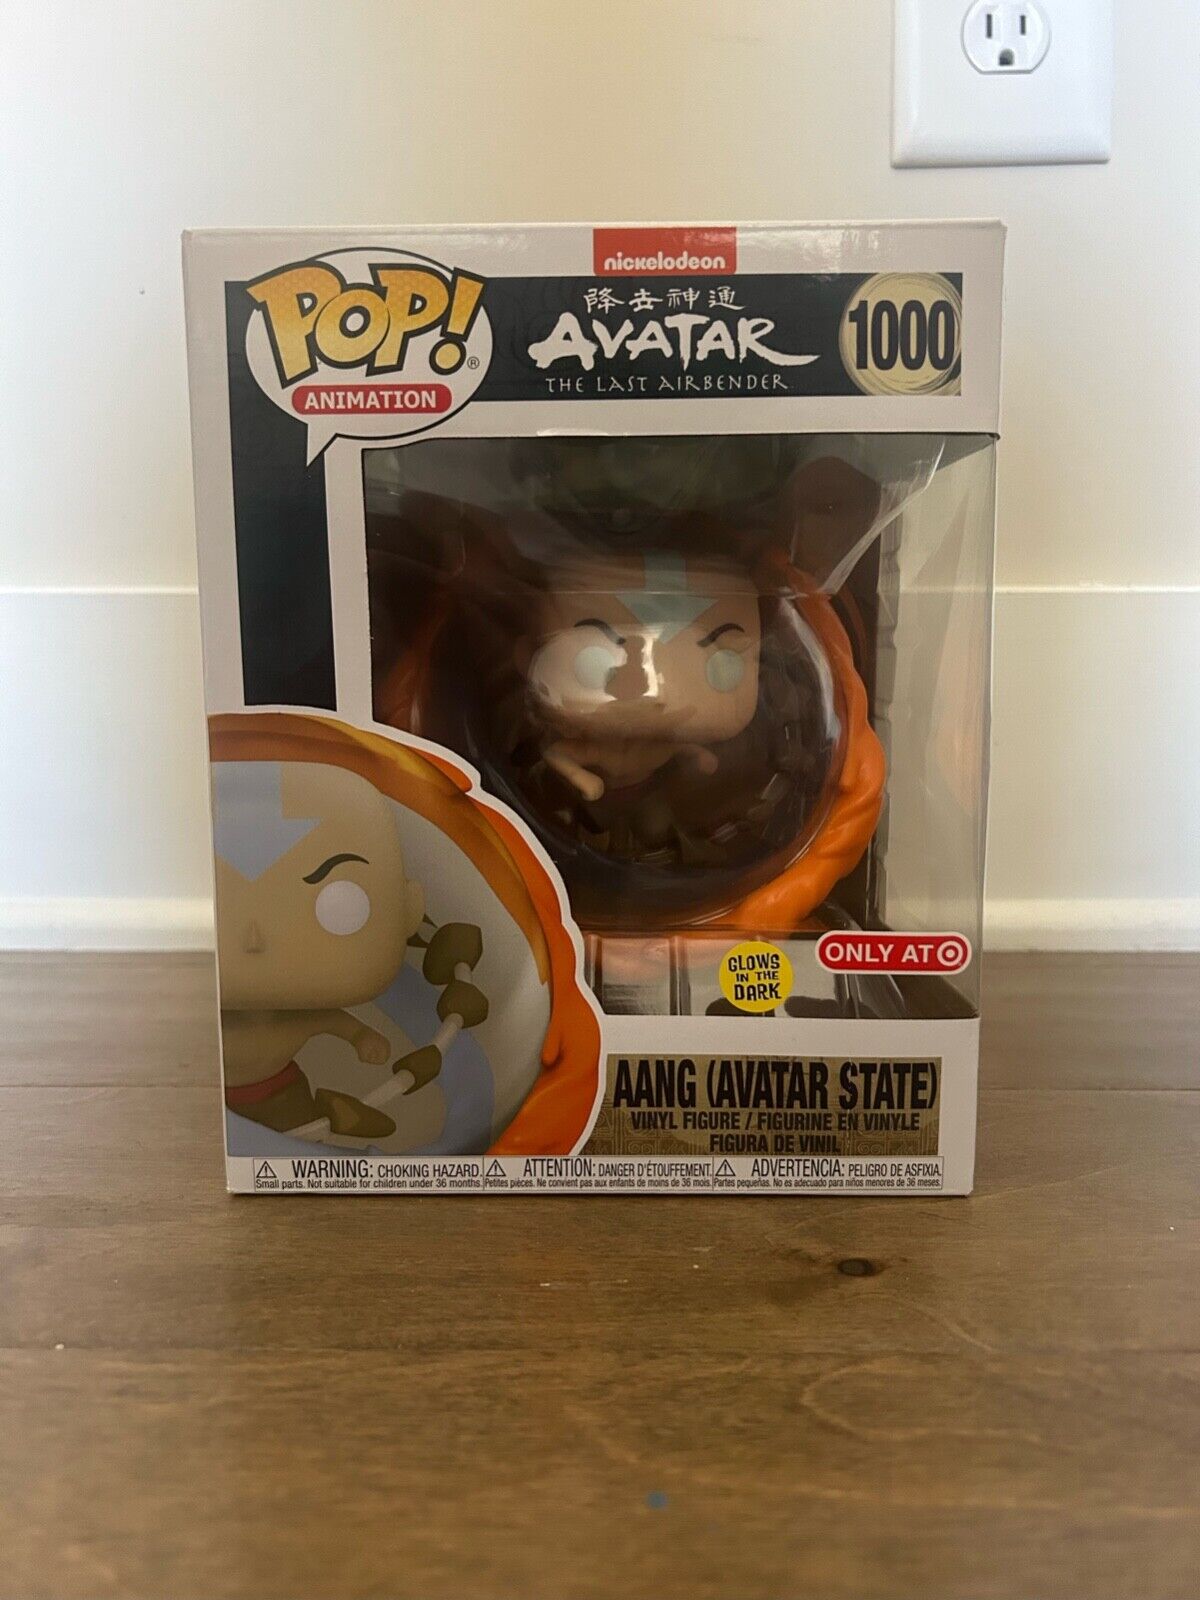 1000 Avatar the Last Airbender, Aang (Avatar State) (Glow in the Dark)